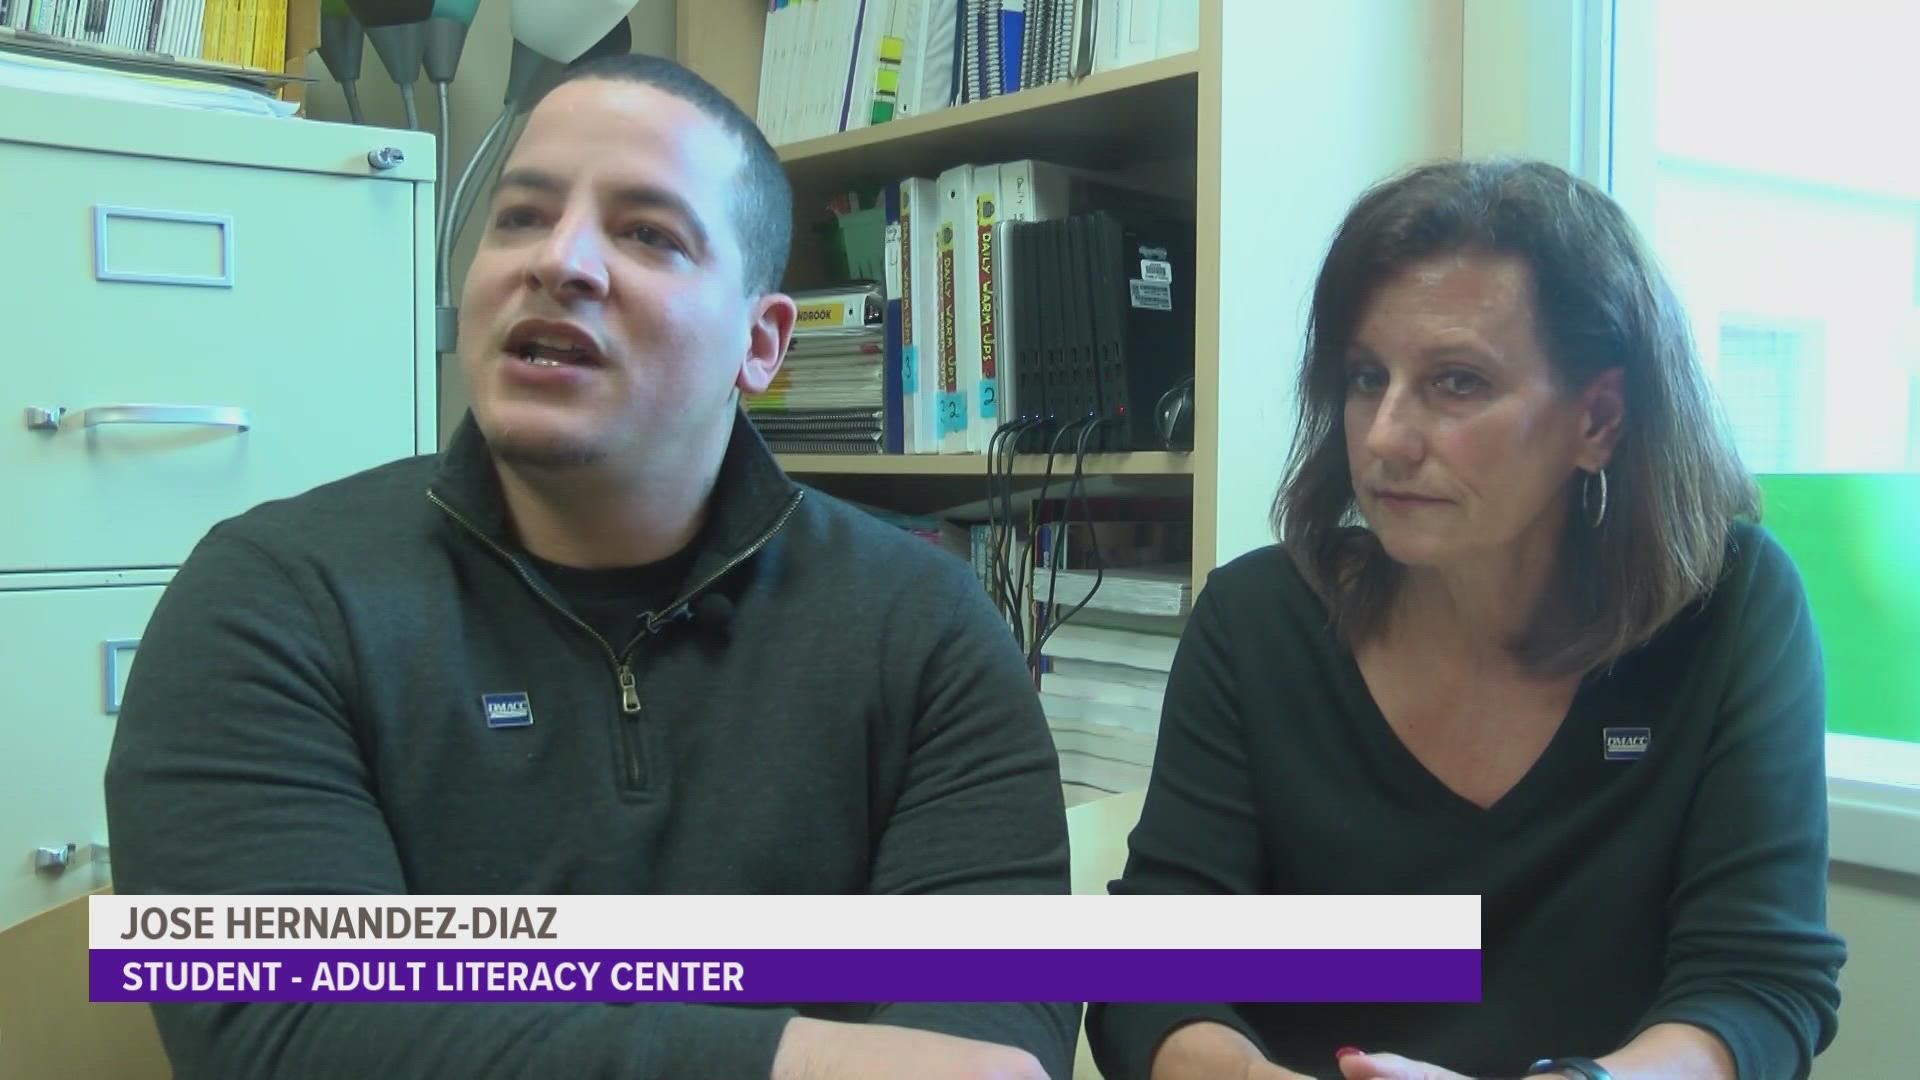 The Adult Literacy Center has seen an influx of adults who want help improving their reading skills. Jose Hernandez-Dias shares his experience with the program